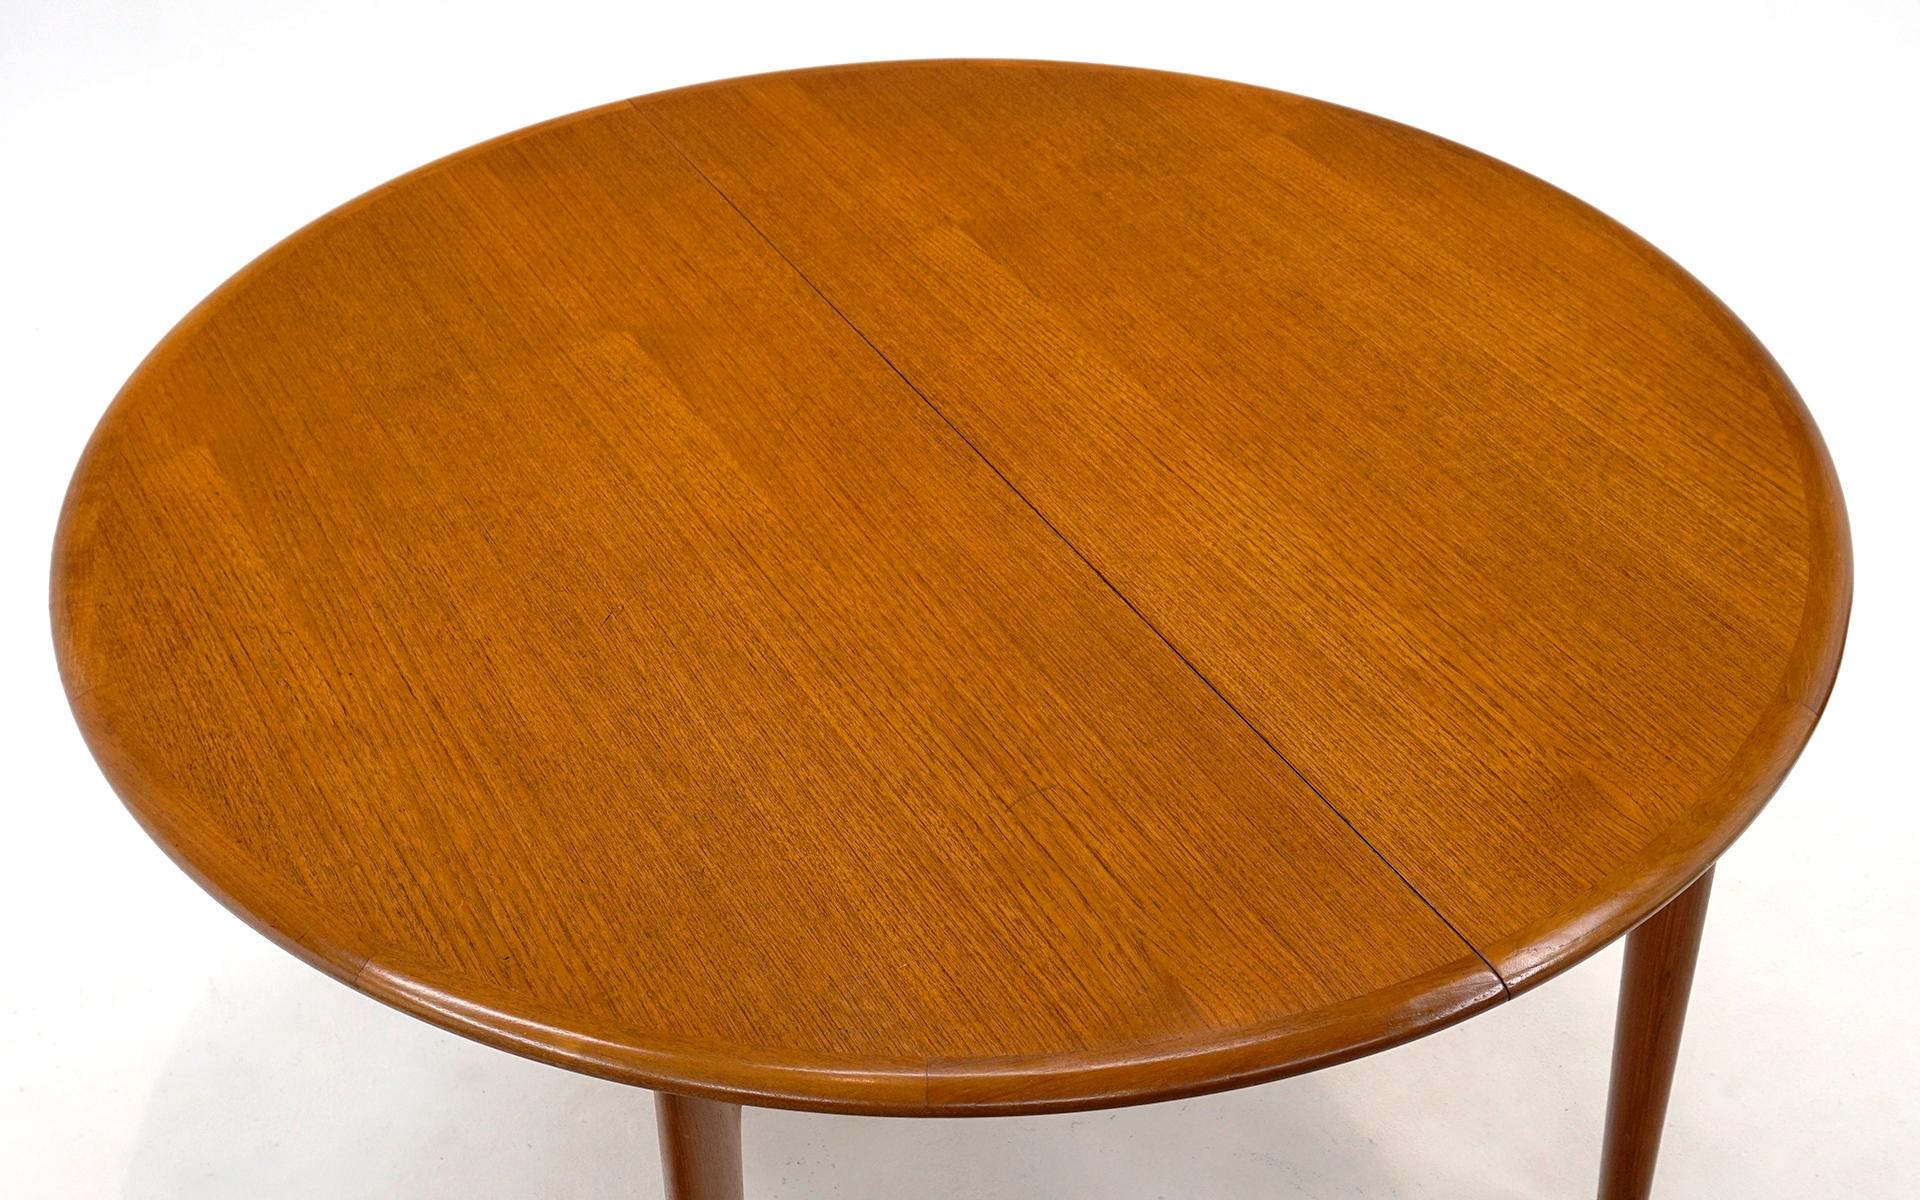 Round Expandable Danish Modern Teak Dining Table with Two Leaves, 1962, Original 5